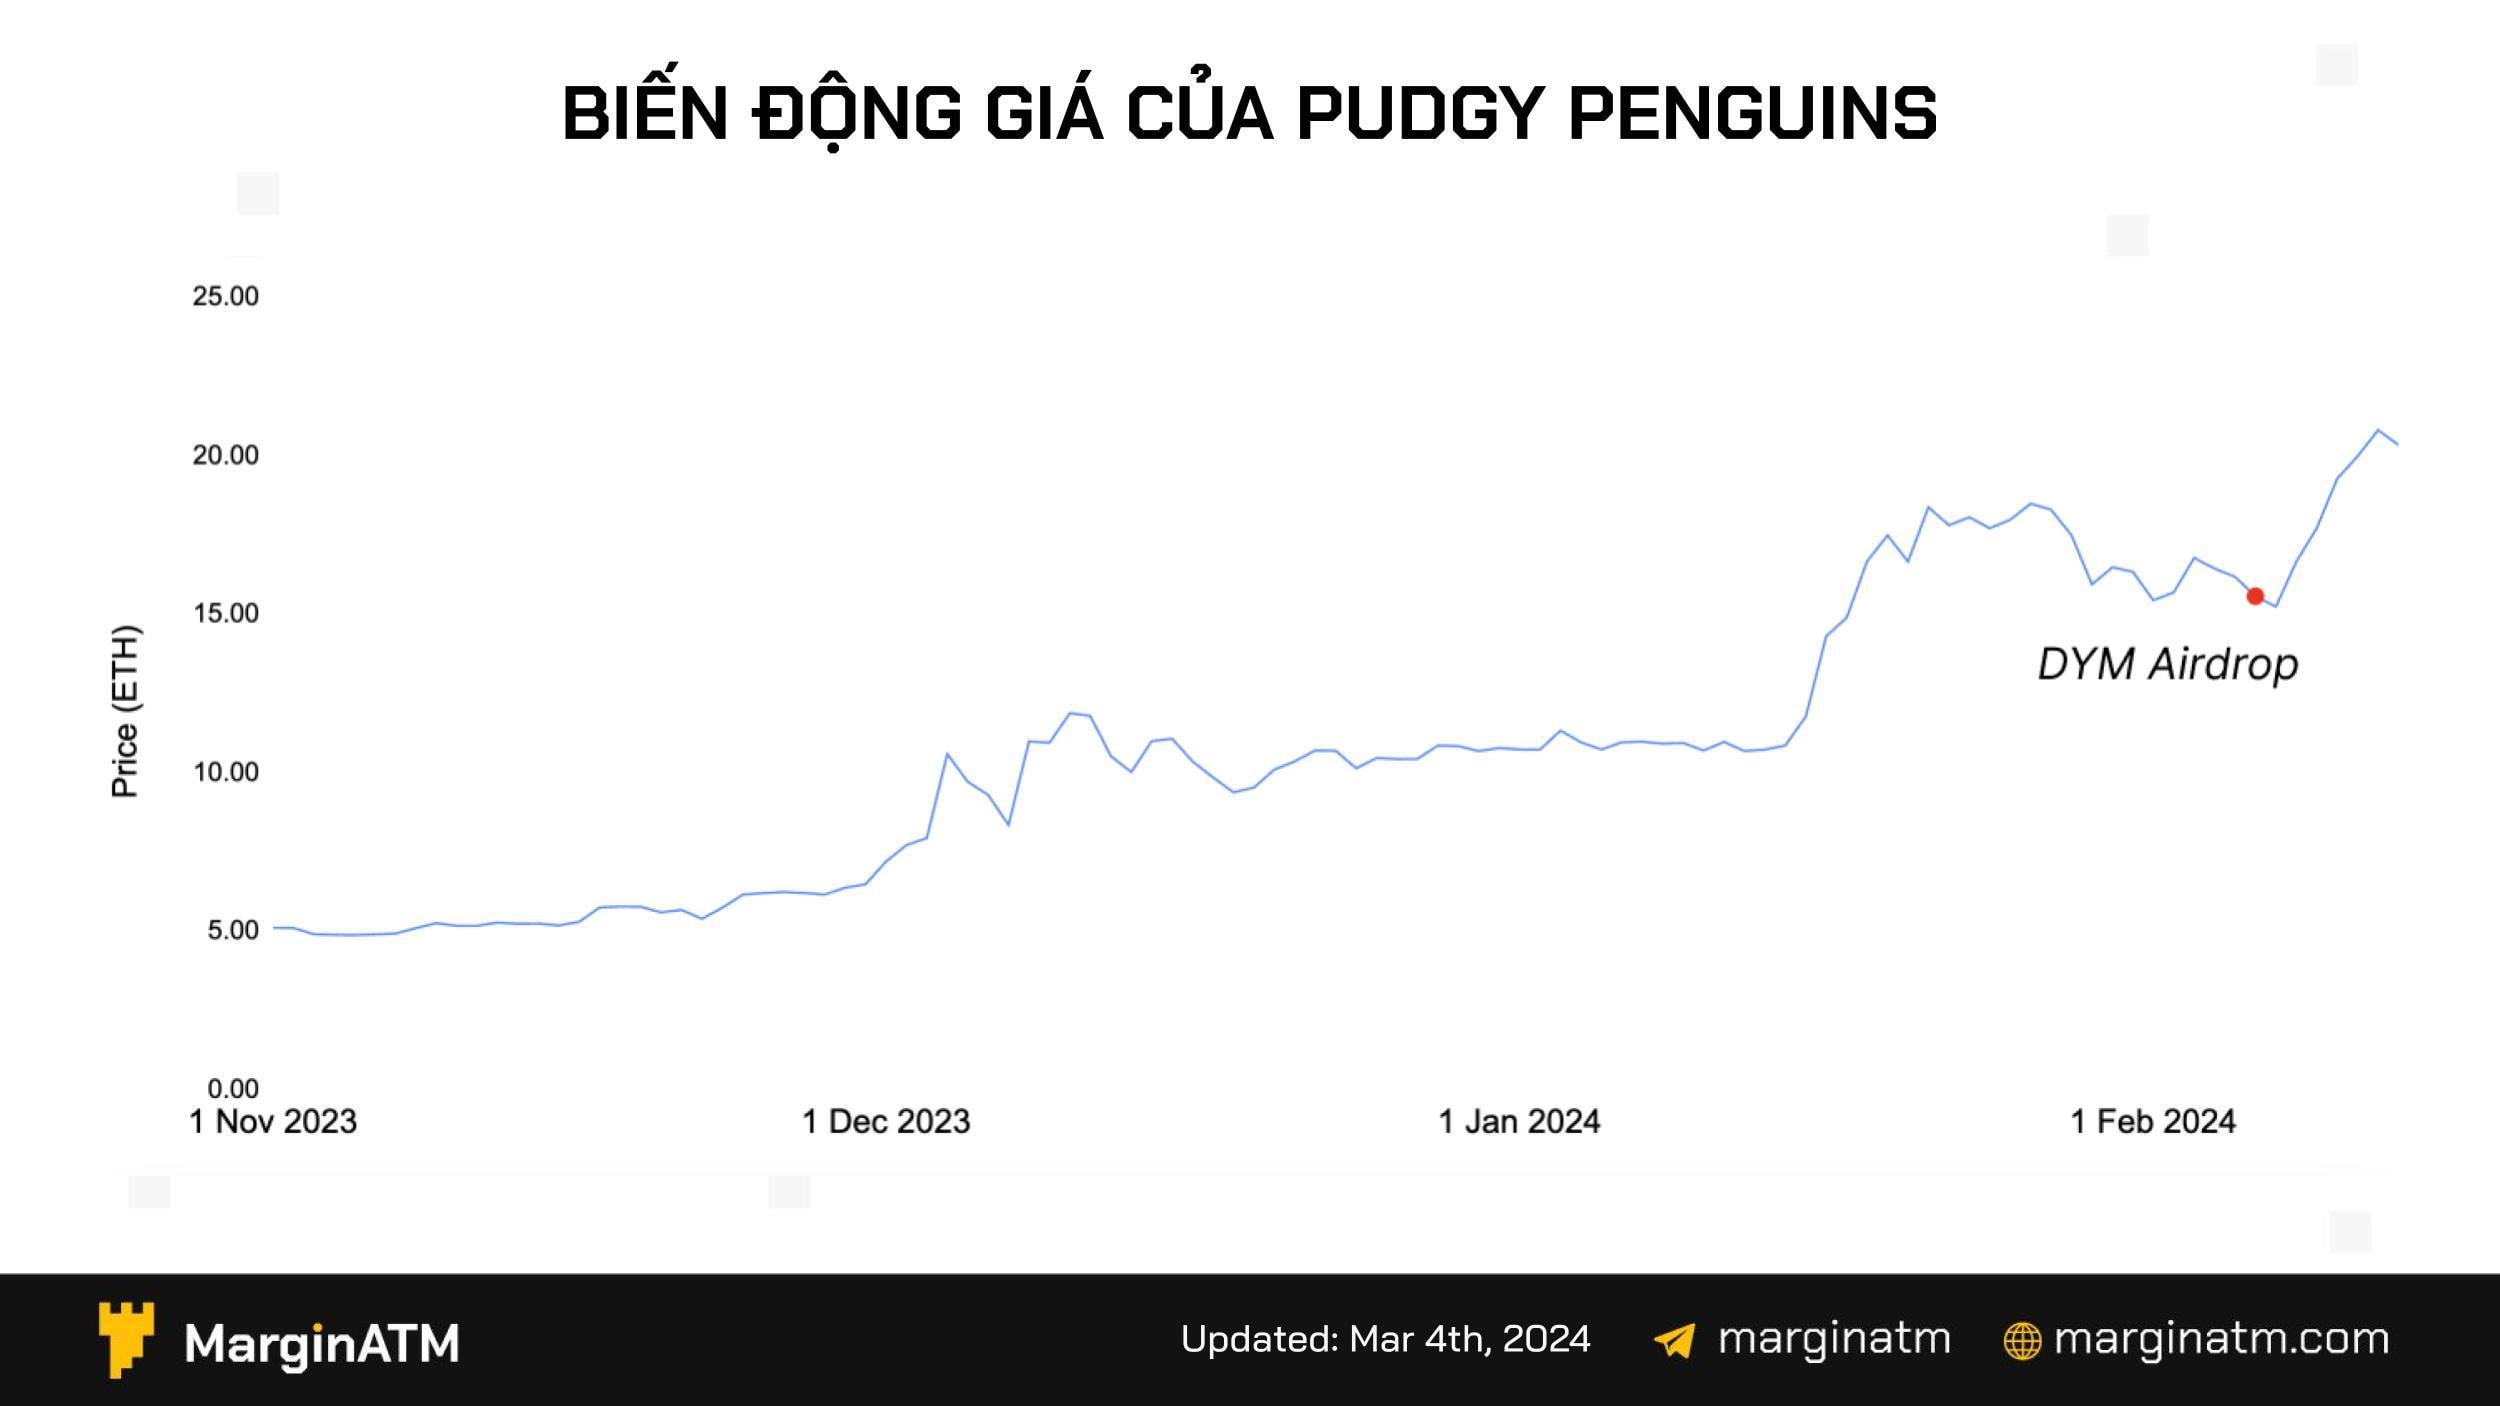 giá pudgy penguins dym airdrop